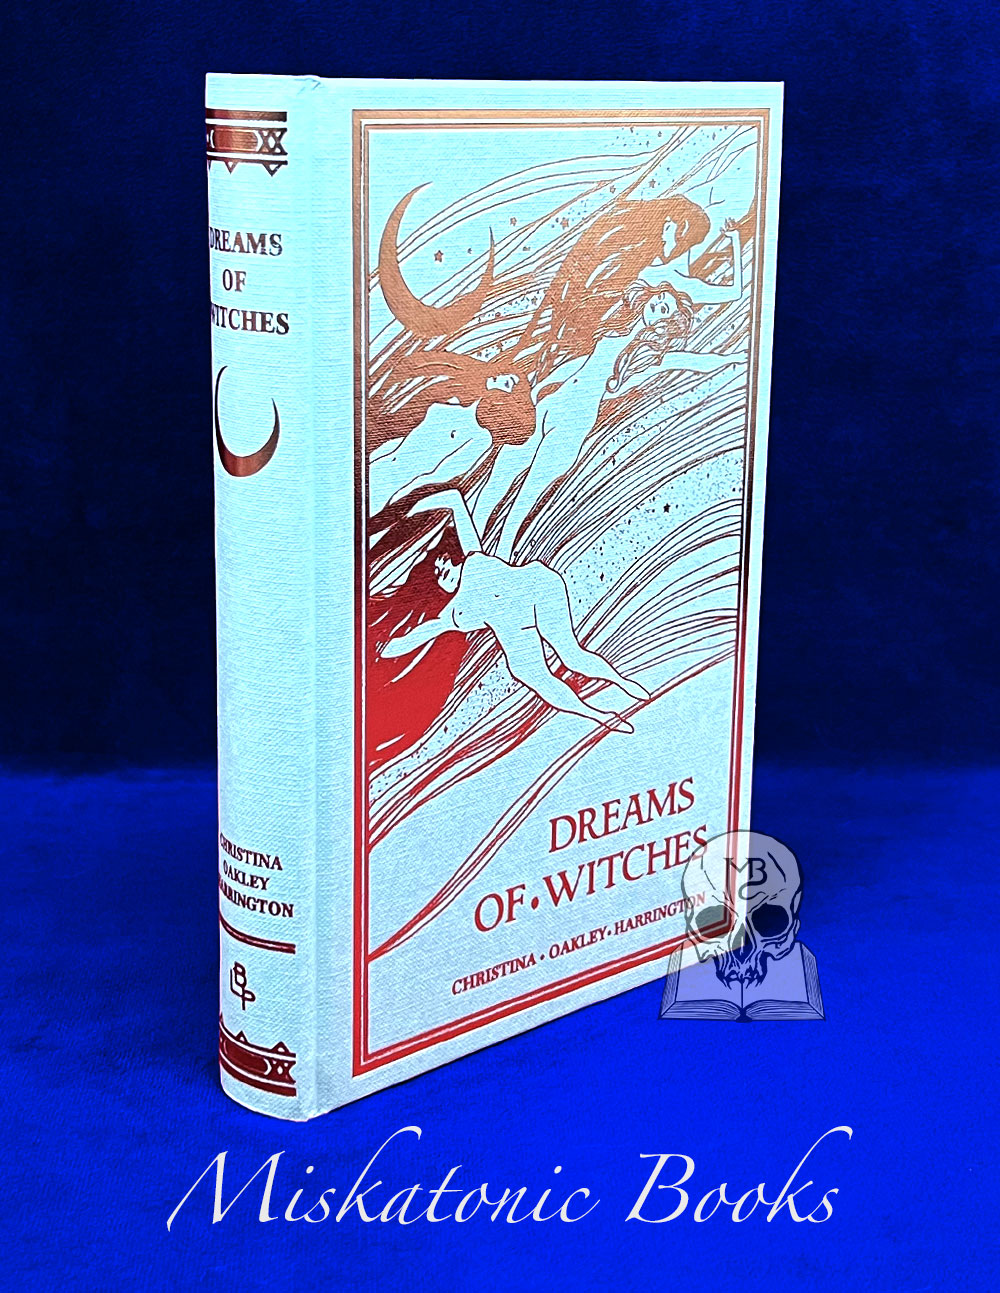 DREAMS OF WITCHES by Christina Oakley Harrington - Hardcover Edition